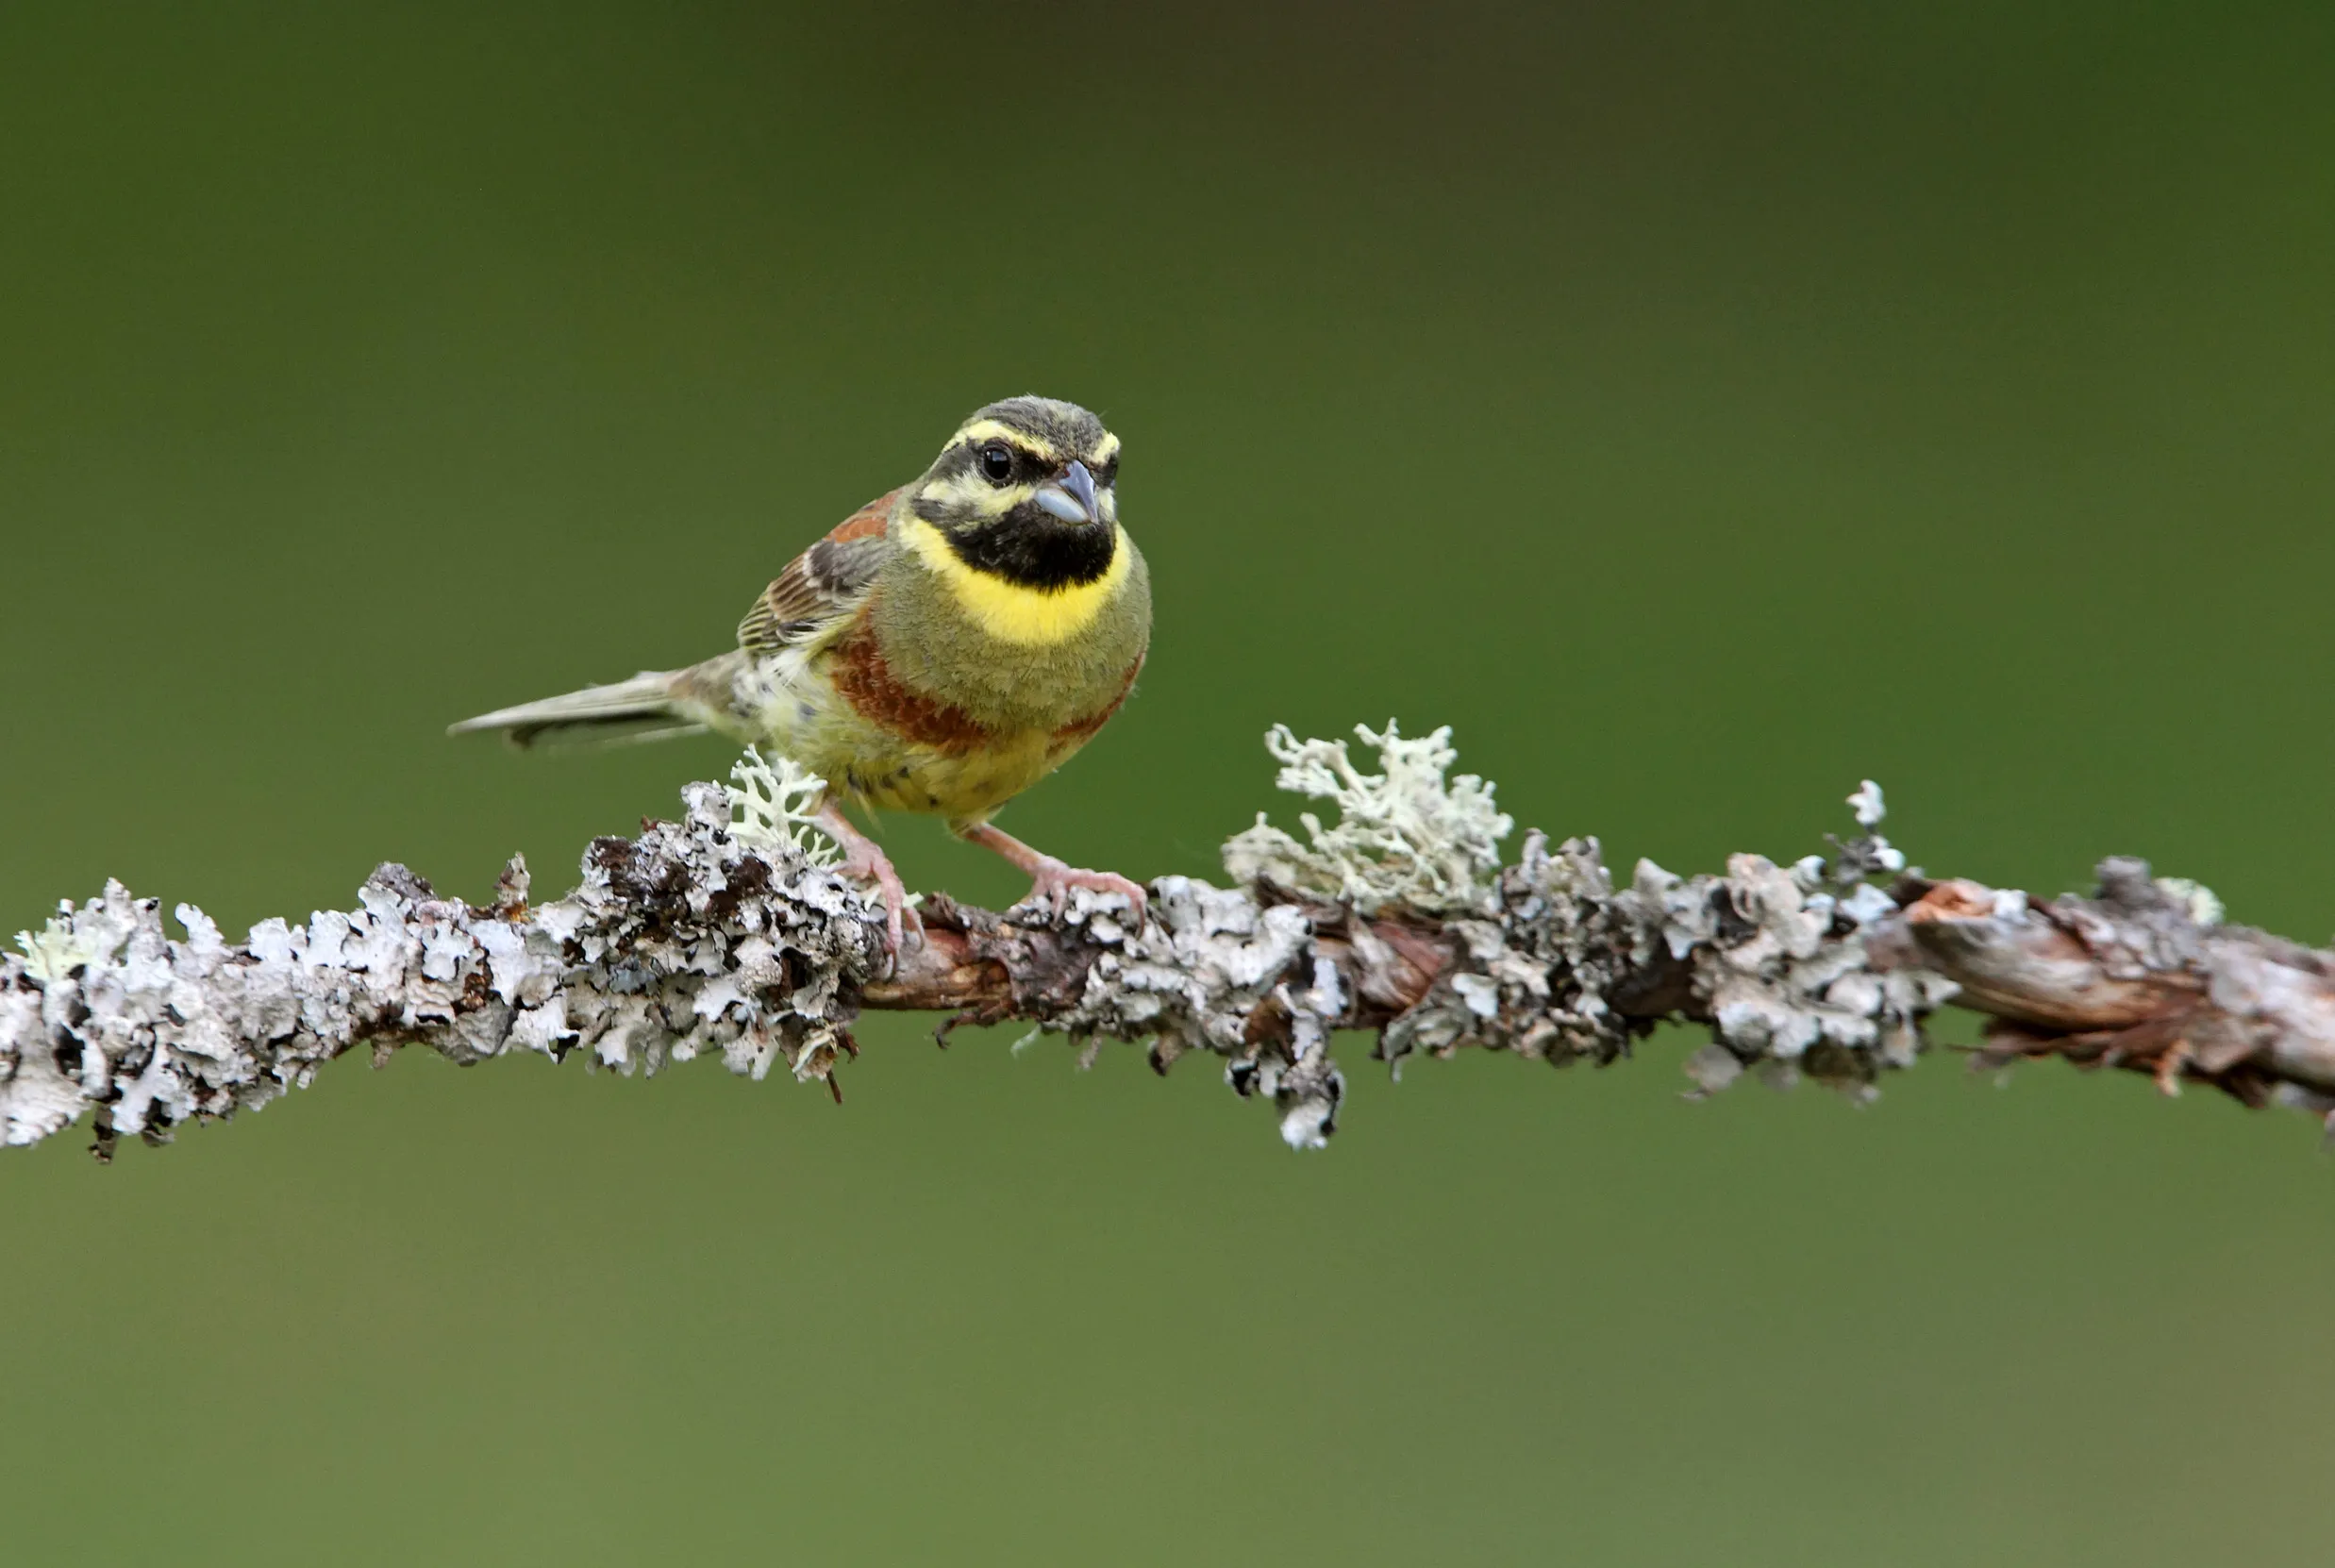 A male Cirl Bunting perched on a lichen covered branch.